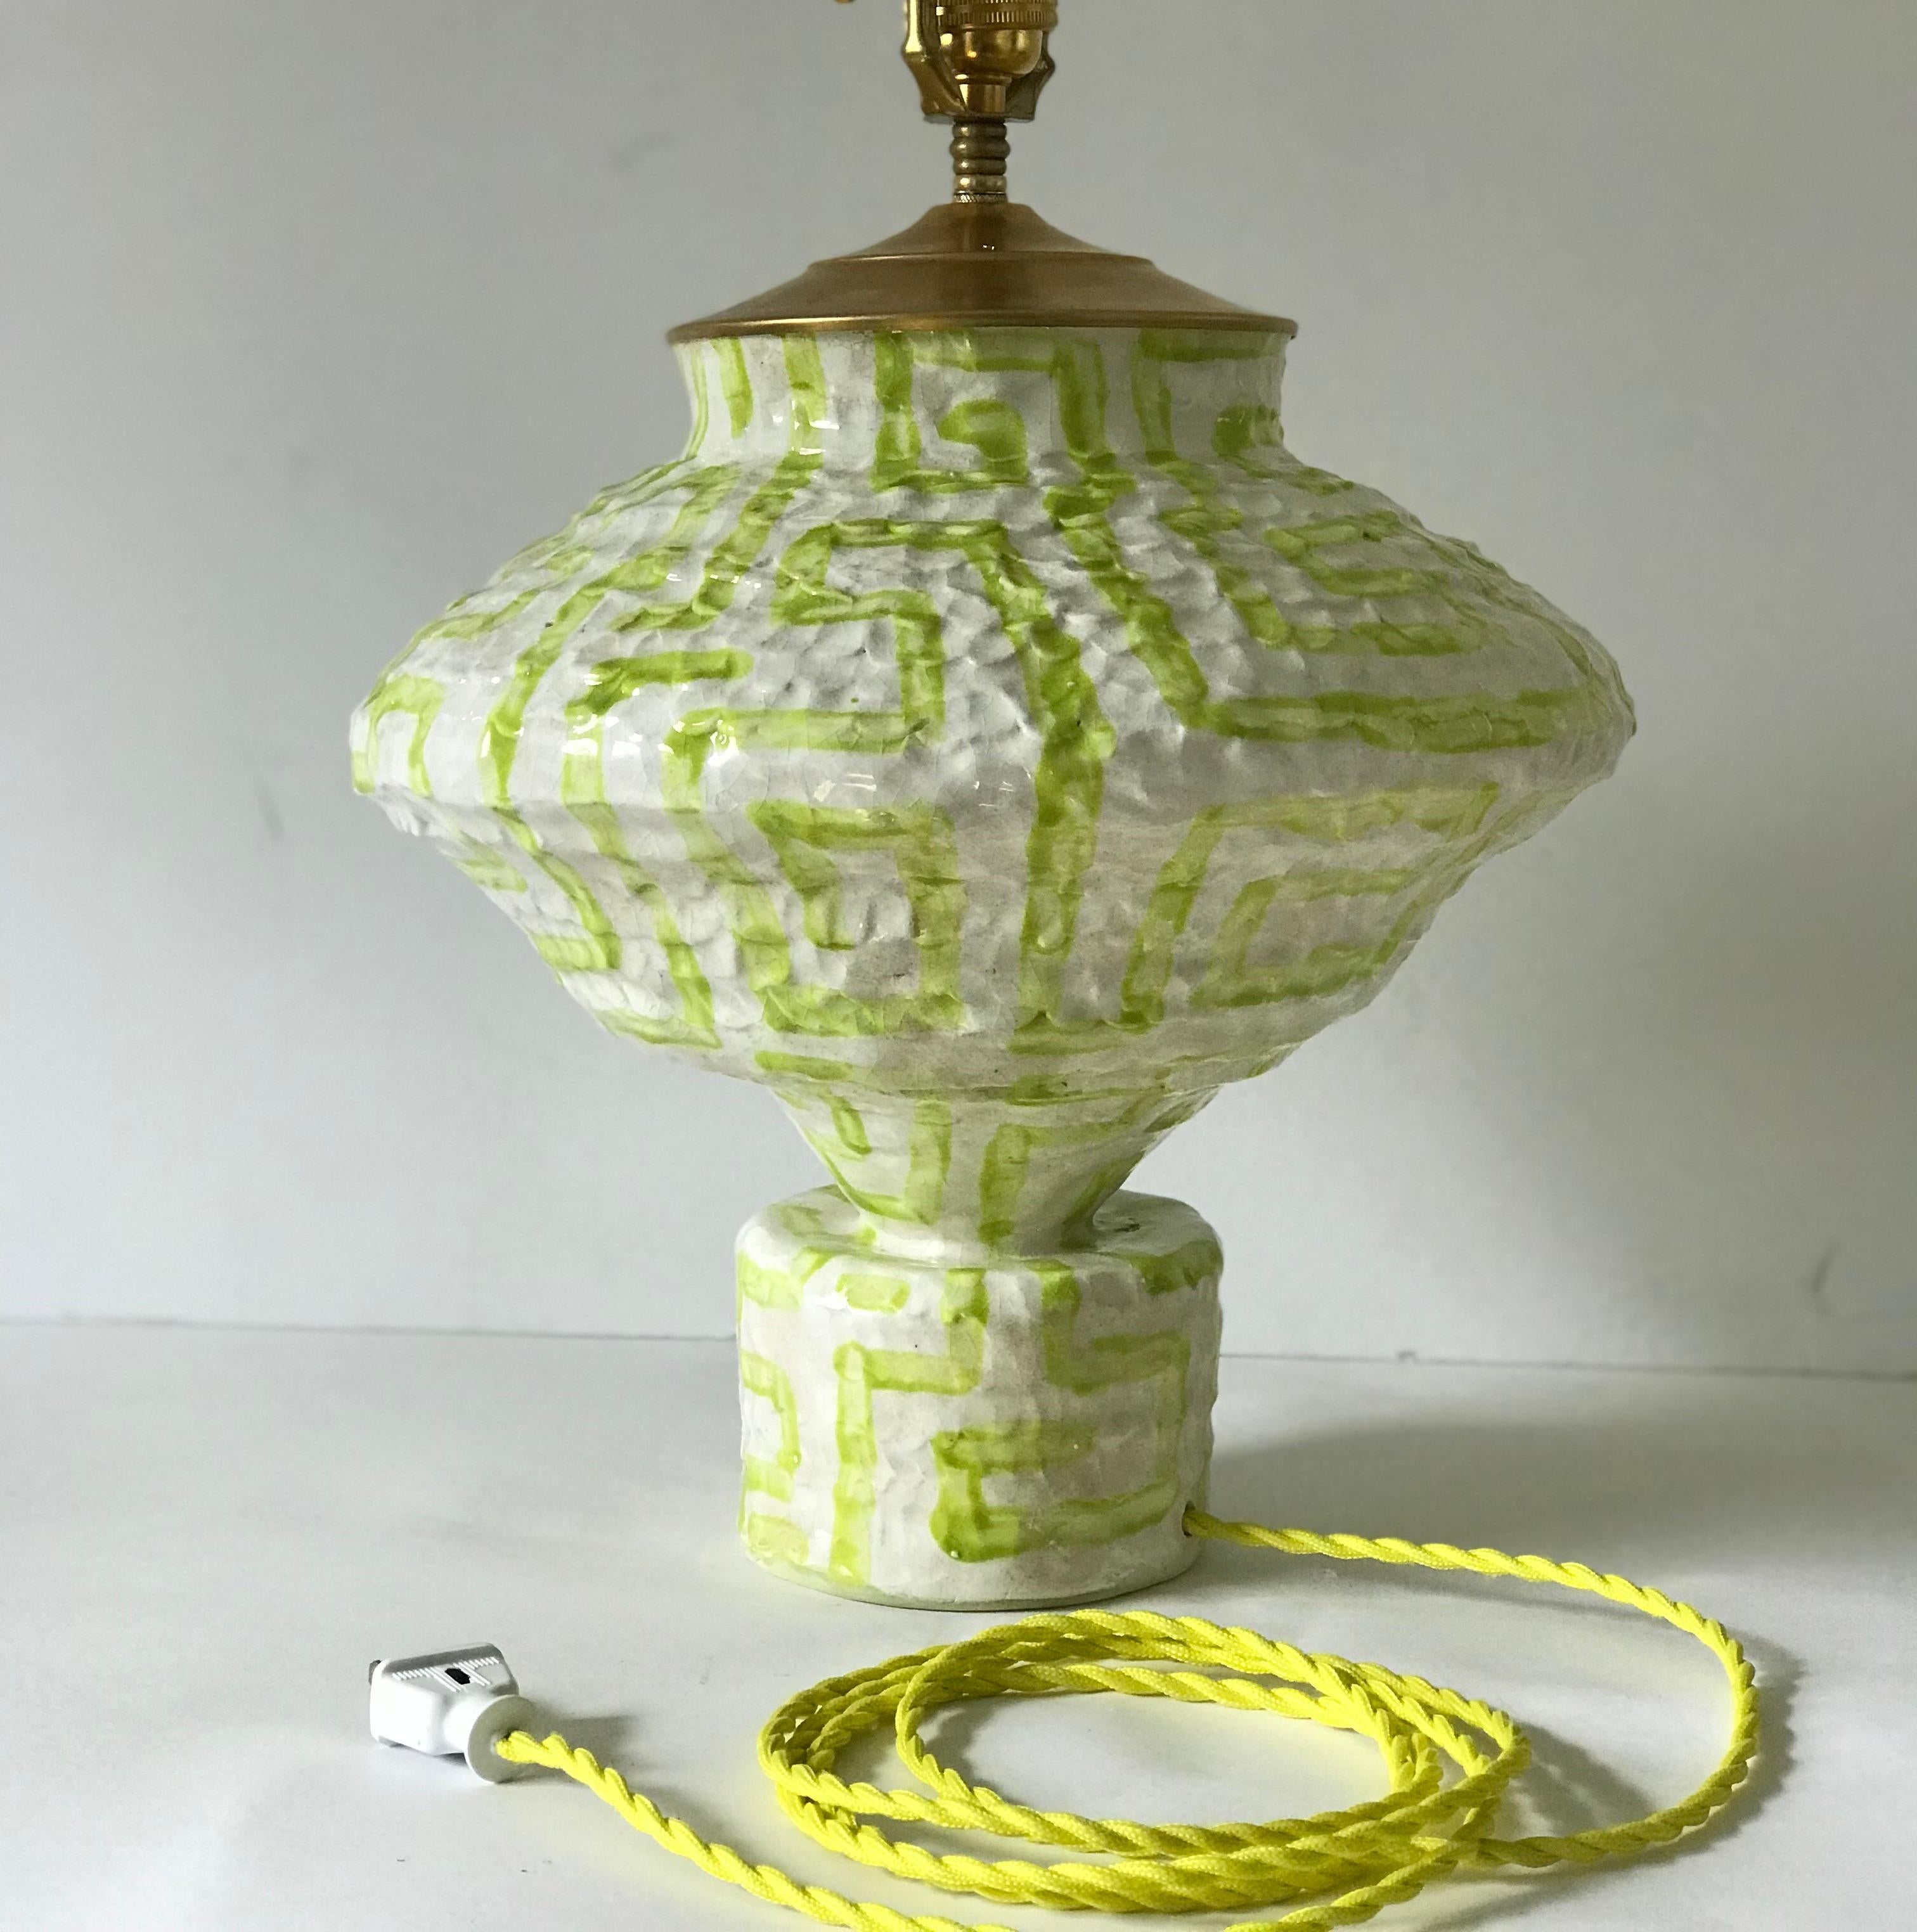 Hand-Crafted Contemporary Hand-Built Ceramic Lamps by Artists Abby Kasonik x Kiki Slaughter For Sale